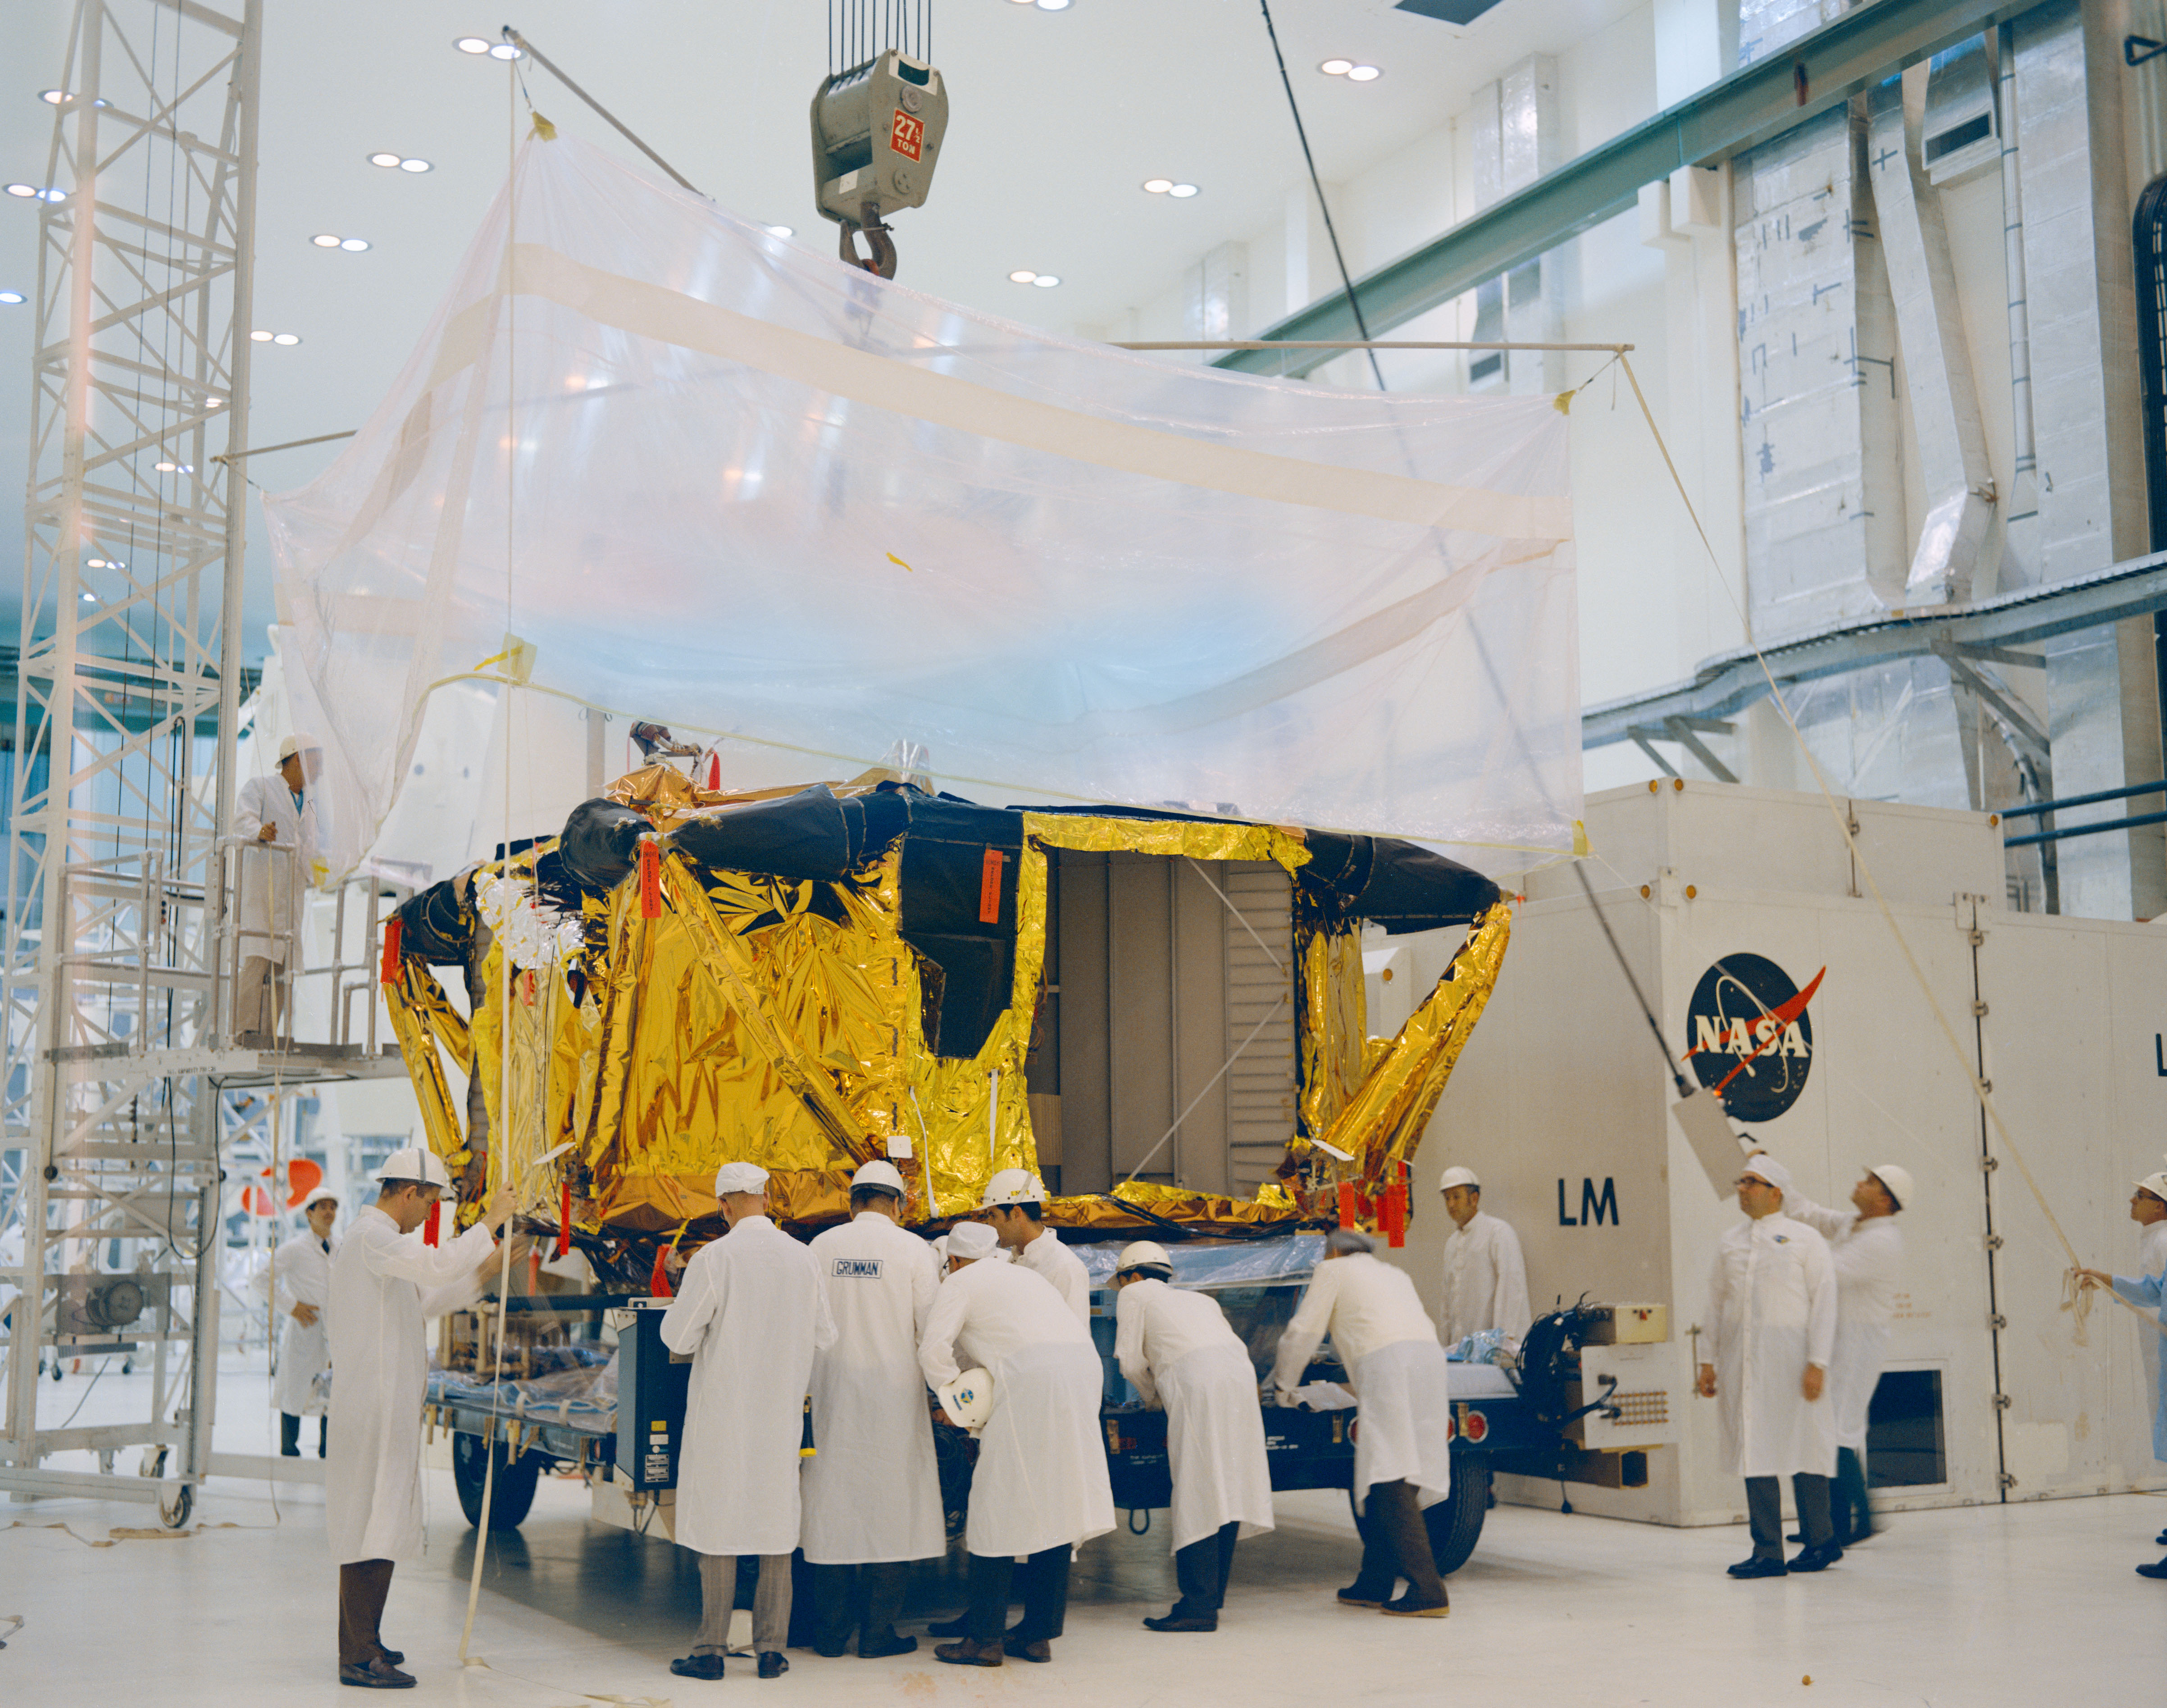 At NASA’s Kennedy Space Center (KSC) in Florida, workers unwrap the Apollo 12 Lunar Module (LM) descent stage shortly after its arrival in the Manned Spacecraft Operations Building